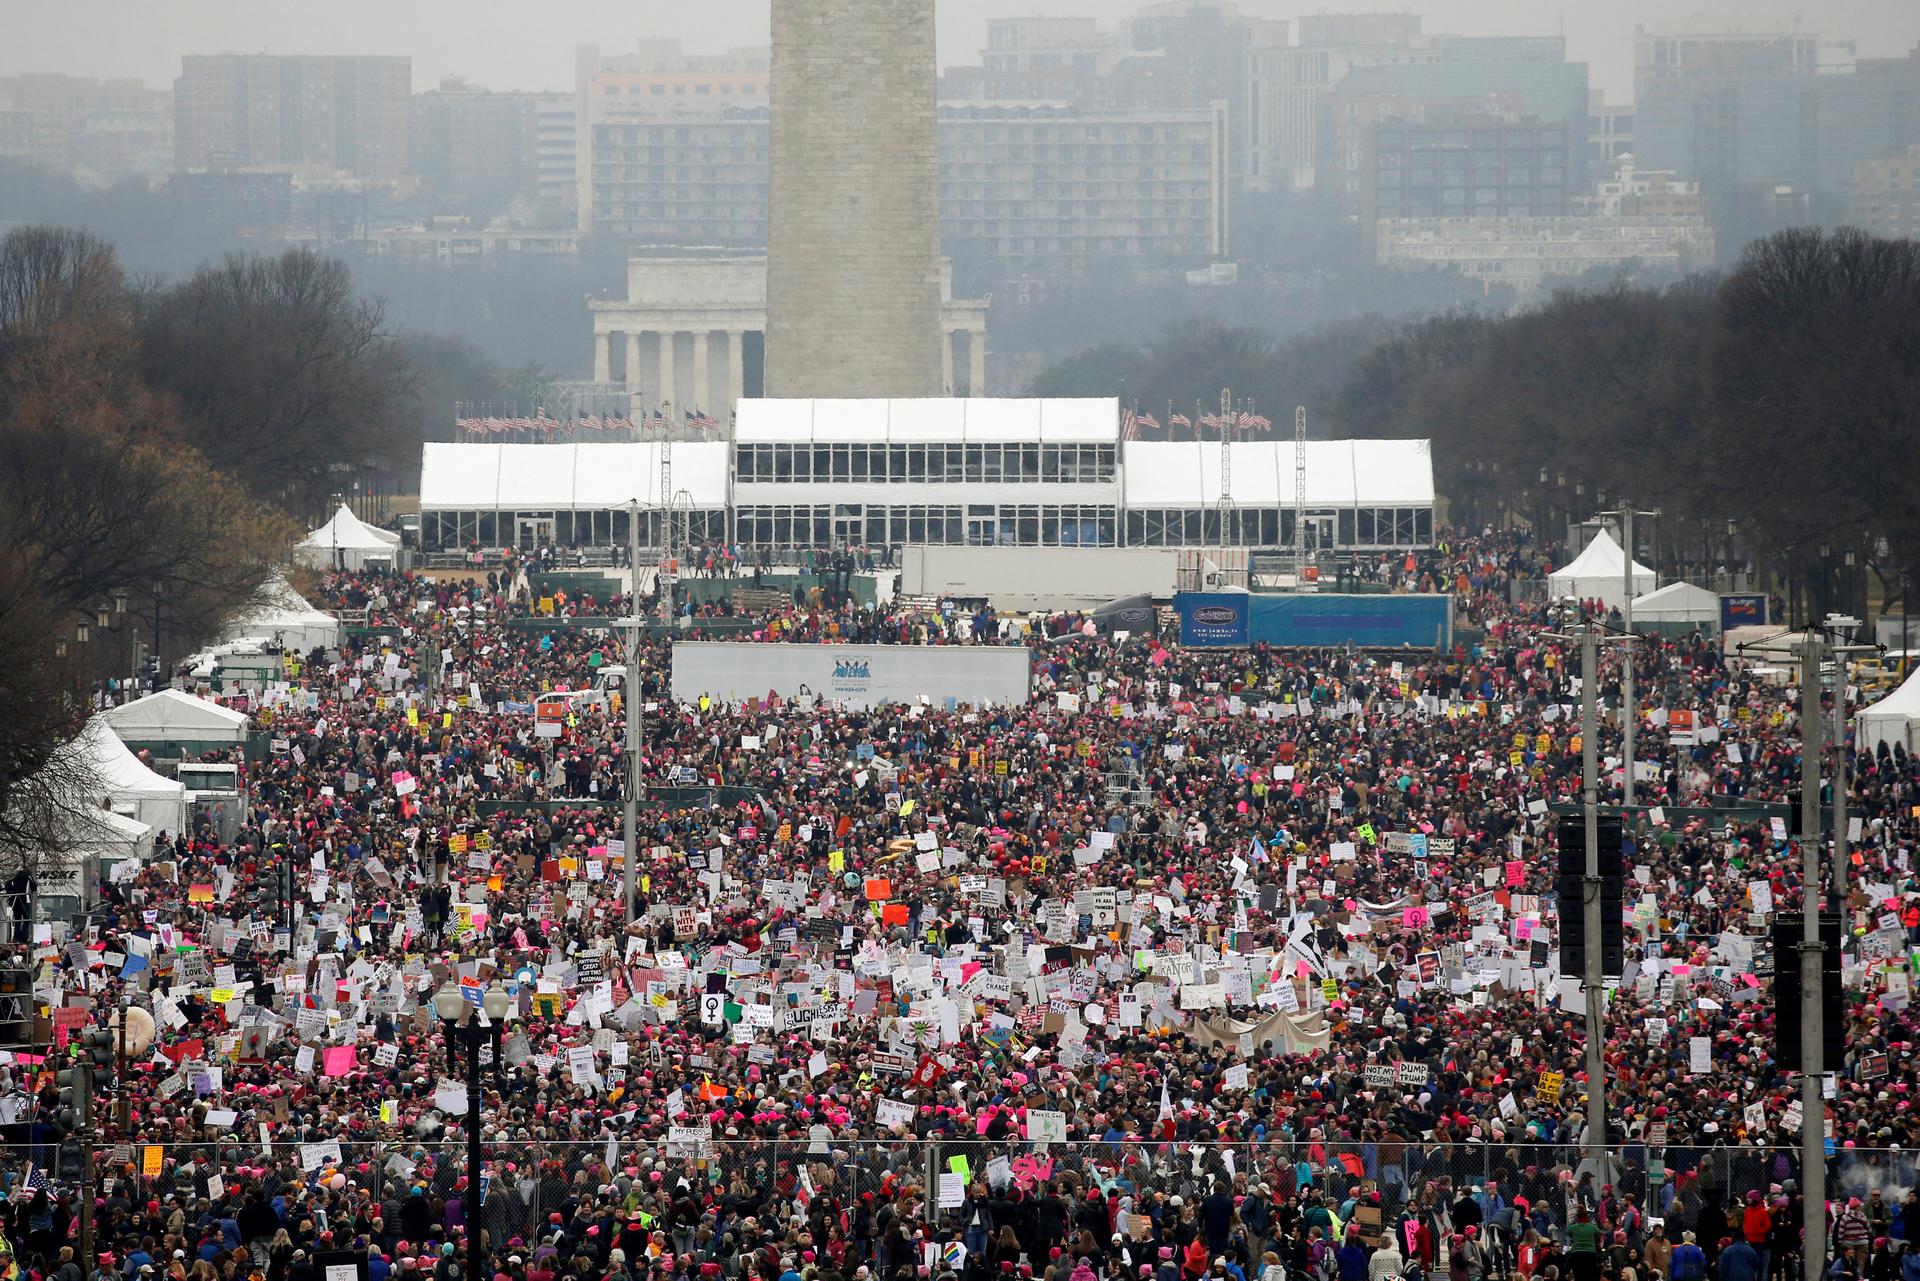 People pack the National Mall for the Women's March